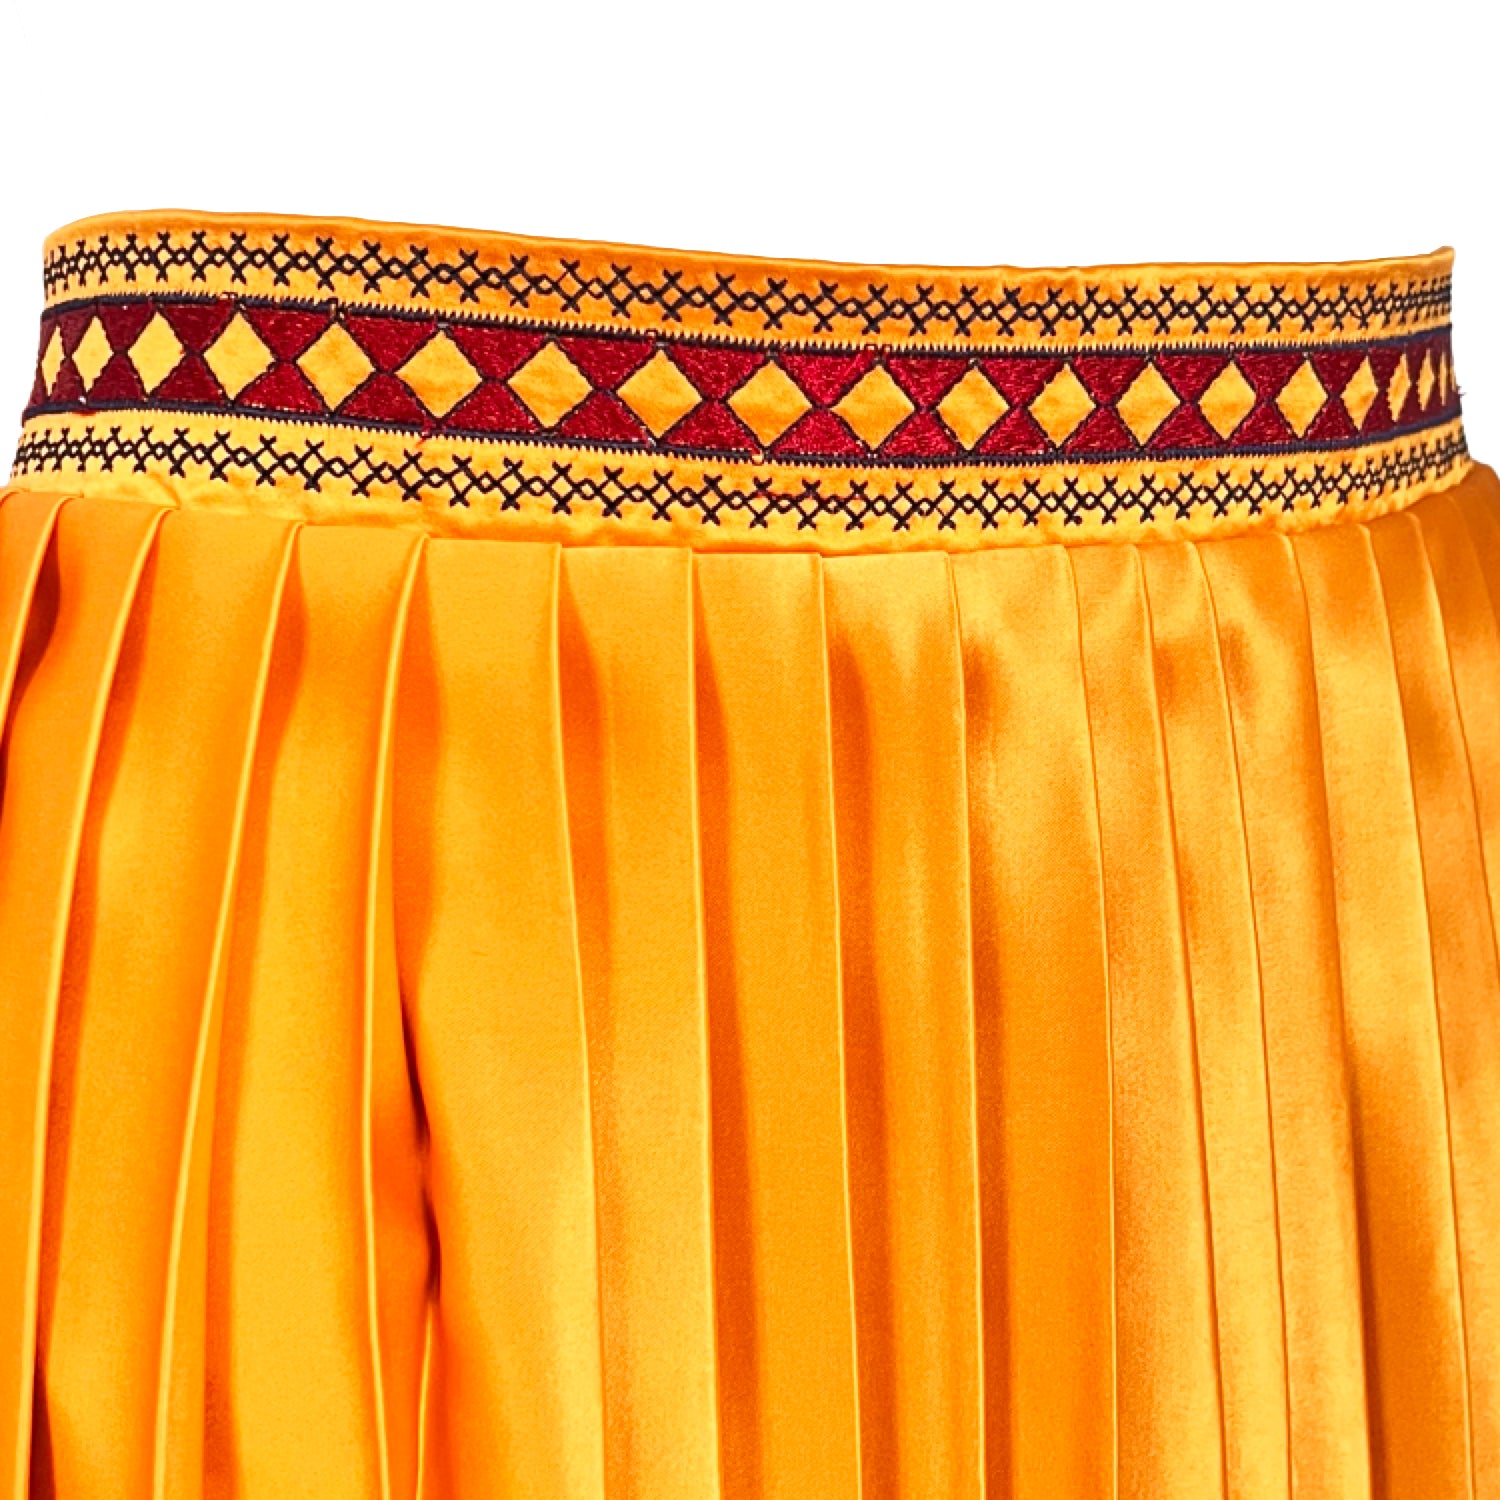 Embroidered Pleated Midi Skirt in Mustard Yellow